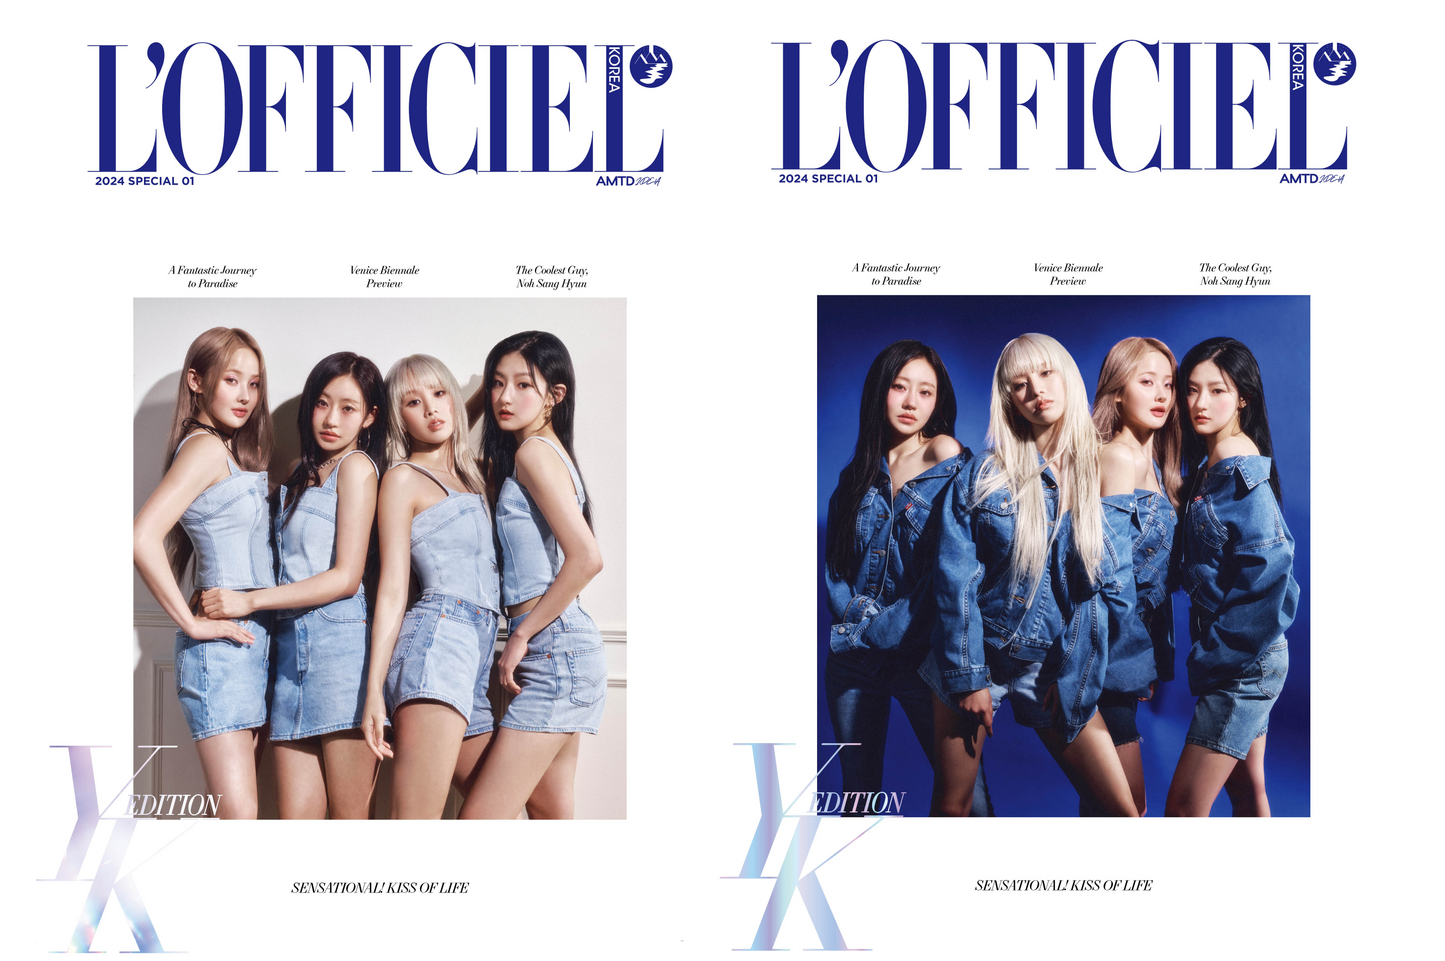 KISS OF LIFE COVER L'OFFICIEL SPECIAL 01 MAGAZINE